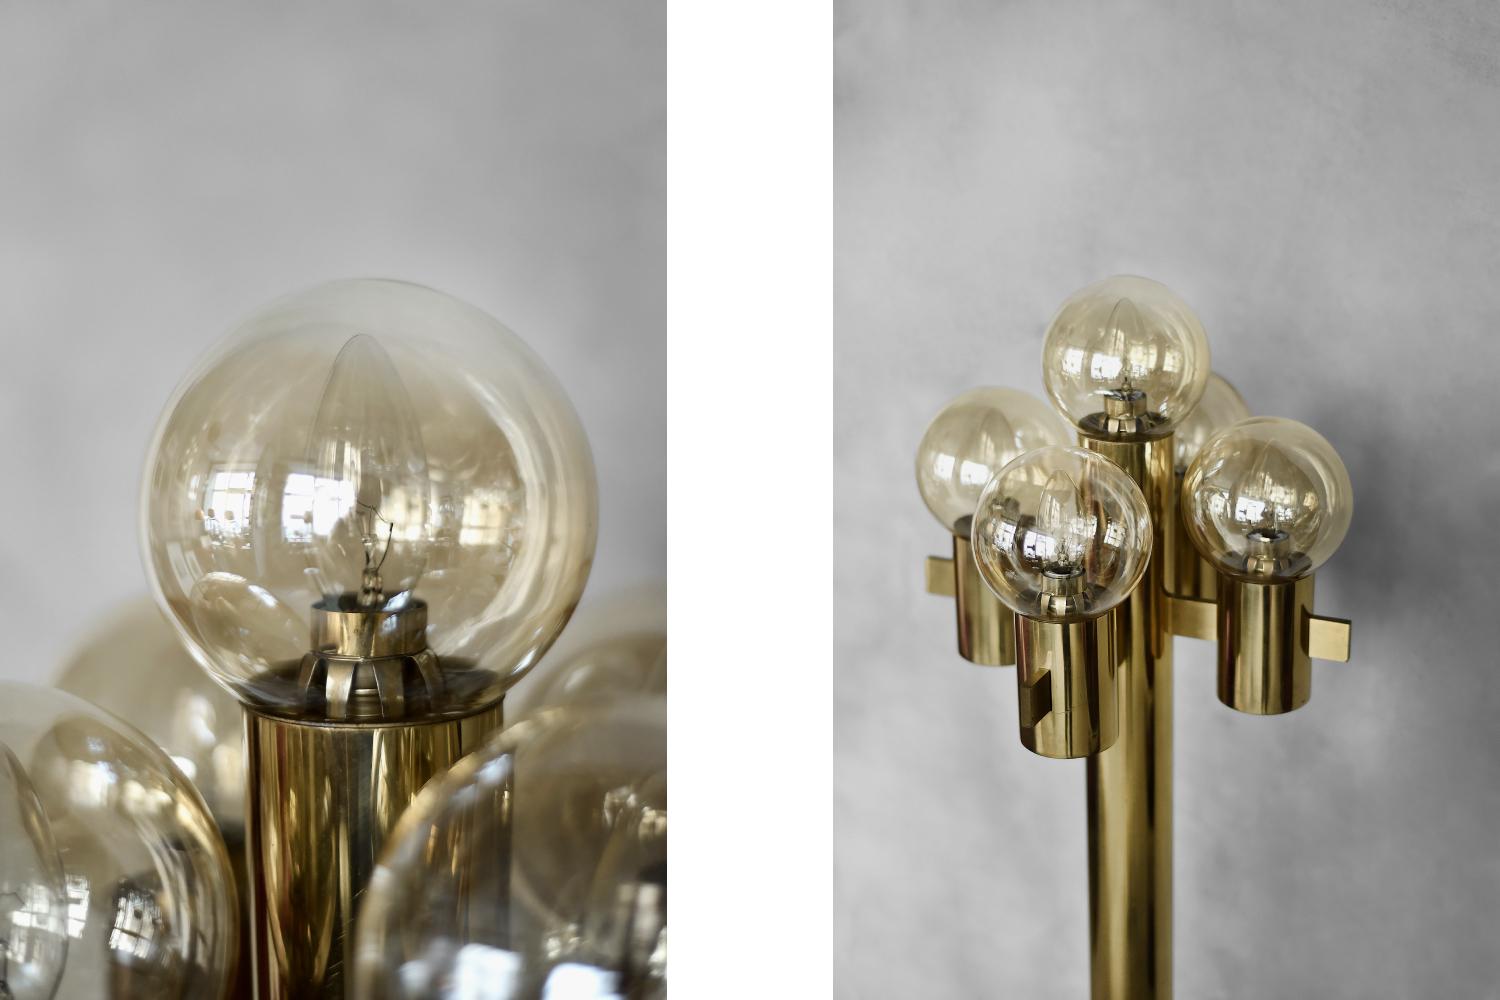 Hollywood Regency Sculptural Gold Floor Lamp with Five Lights by Gaetano Sciolari, 1970s For Sale